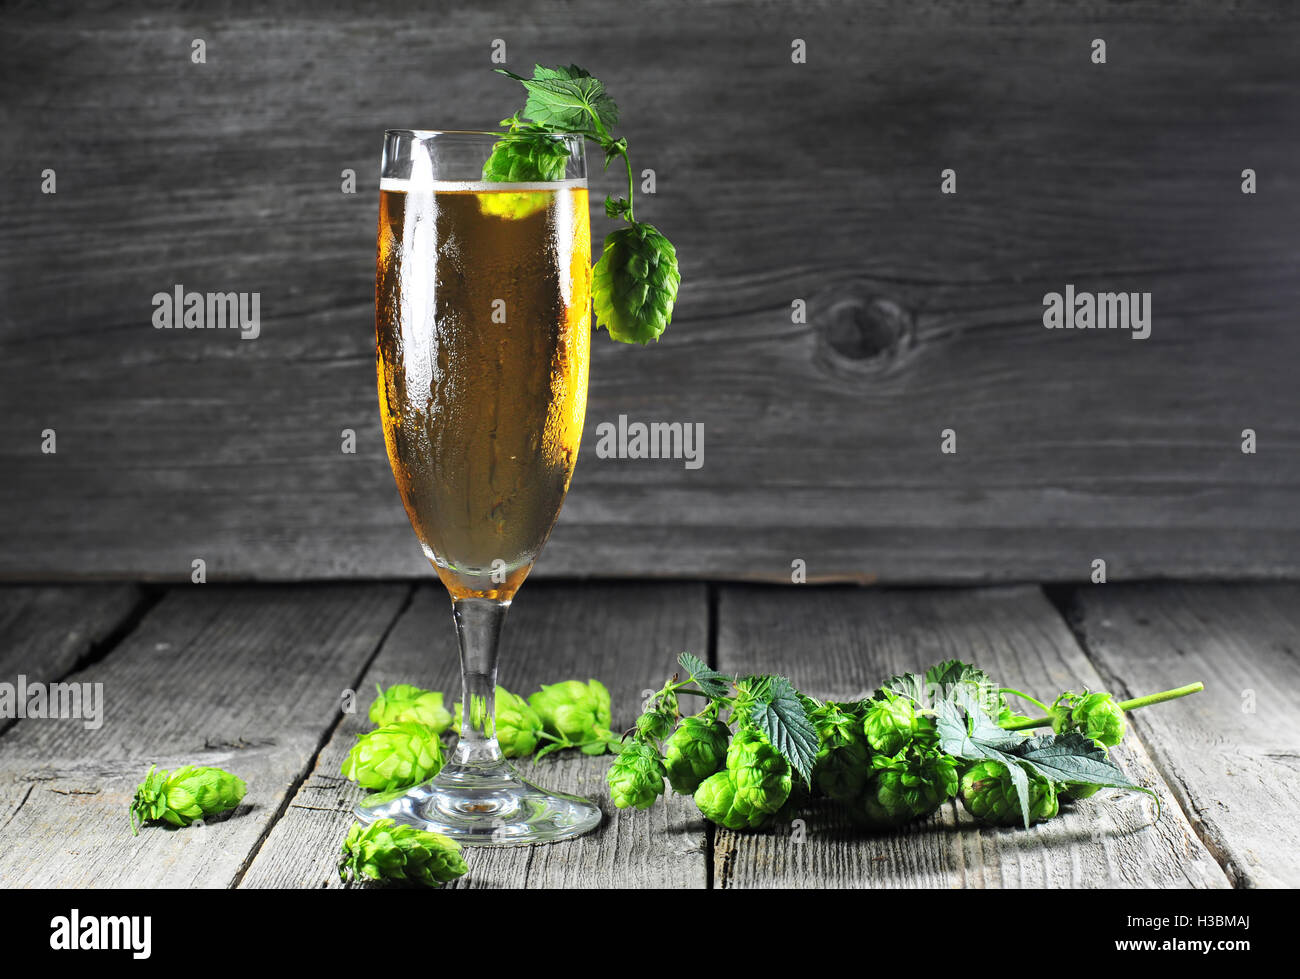 Glass of cold beer and green hops on a wooden table Stock Photo